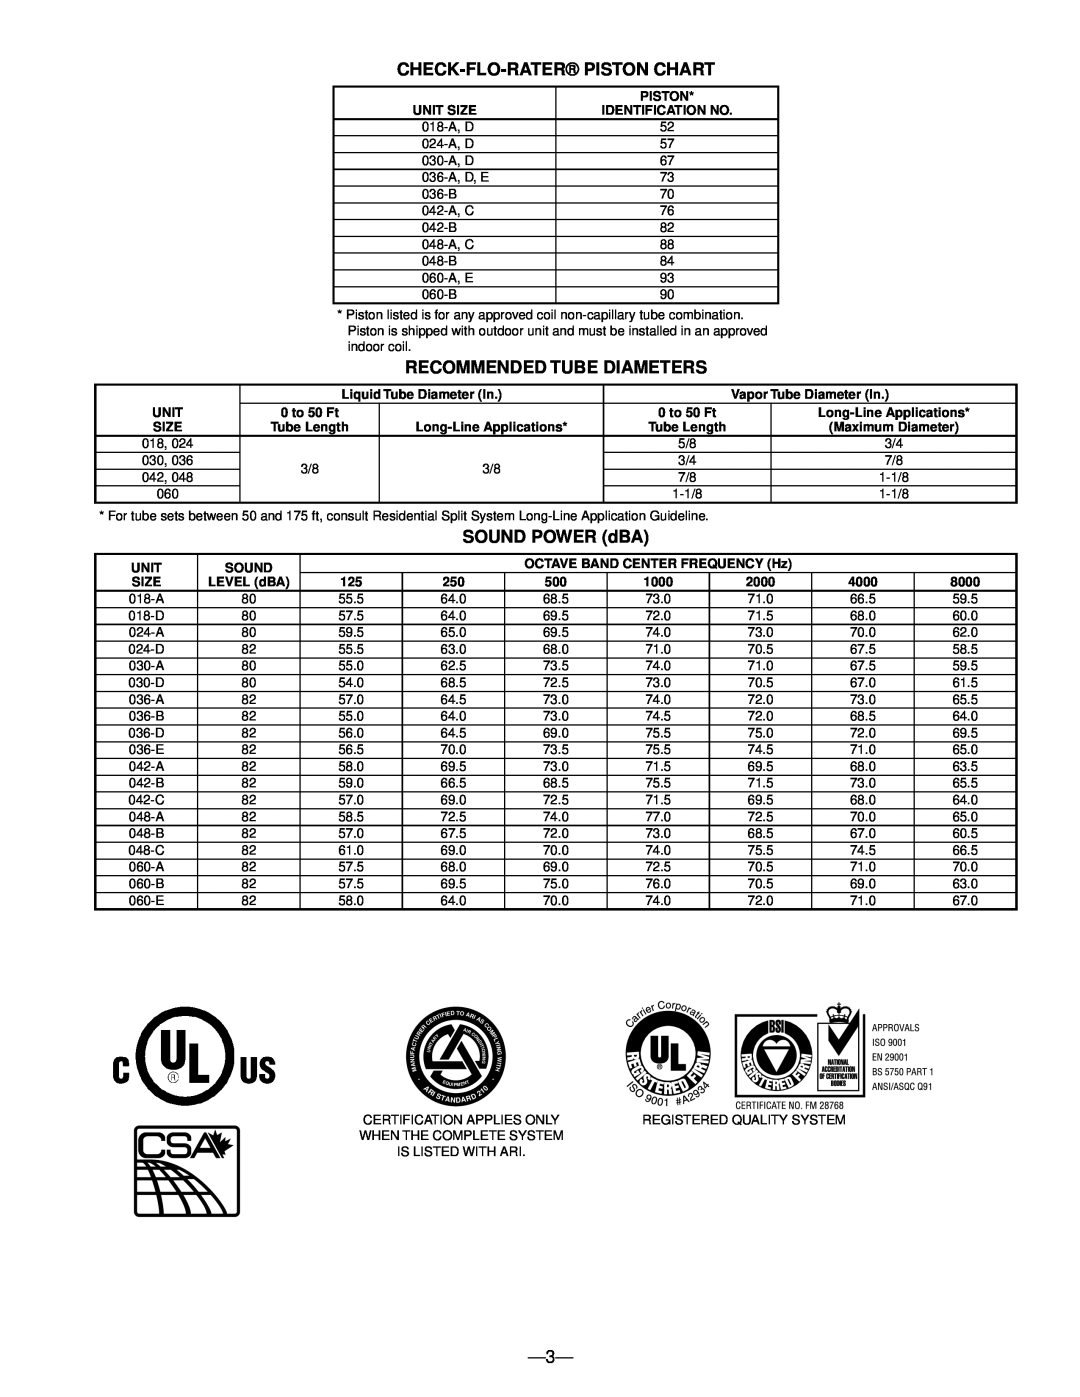 Bryant 561C warranty Check-Flo-Raterpiston Chart, Recommended Tube Diameters, SOUND POWER dBA 